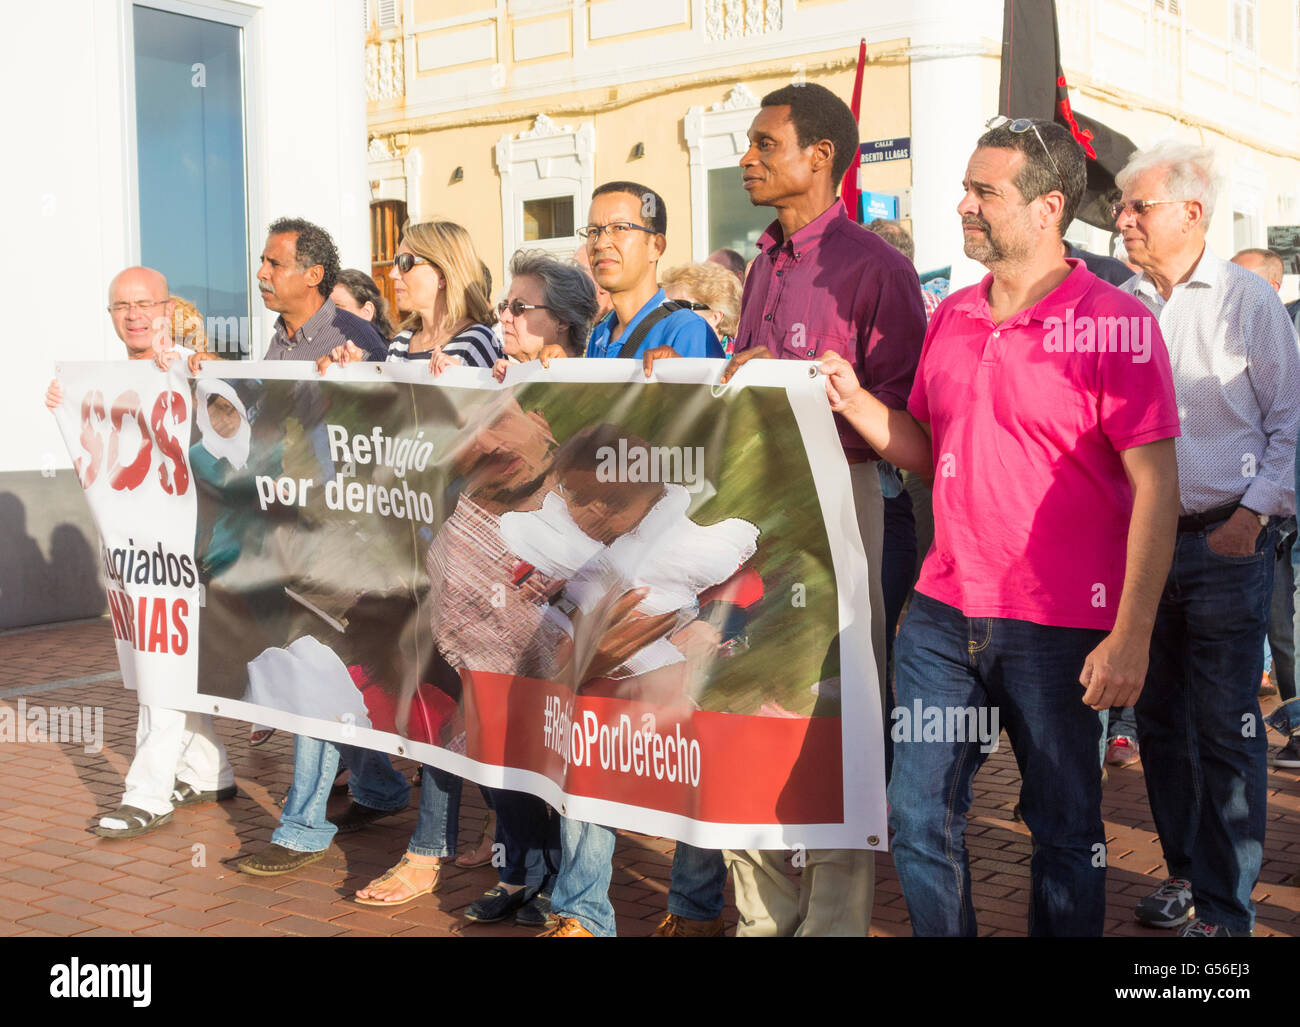 Las Palmas, Gran Canaria, Canary Islands, Spain, 20th June 2016. People carry a banner demanding refuge as a right on World refugee day march in Las Palmas, the capital of Gran Canaria. Credit:  Alan Dawson News/Alamy Live News Stock Photo